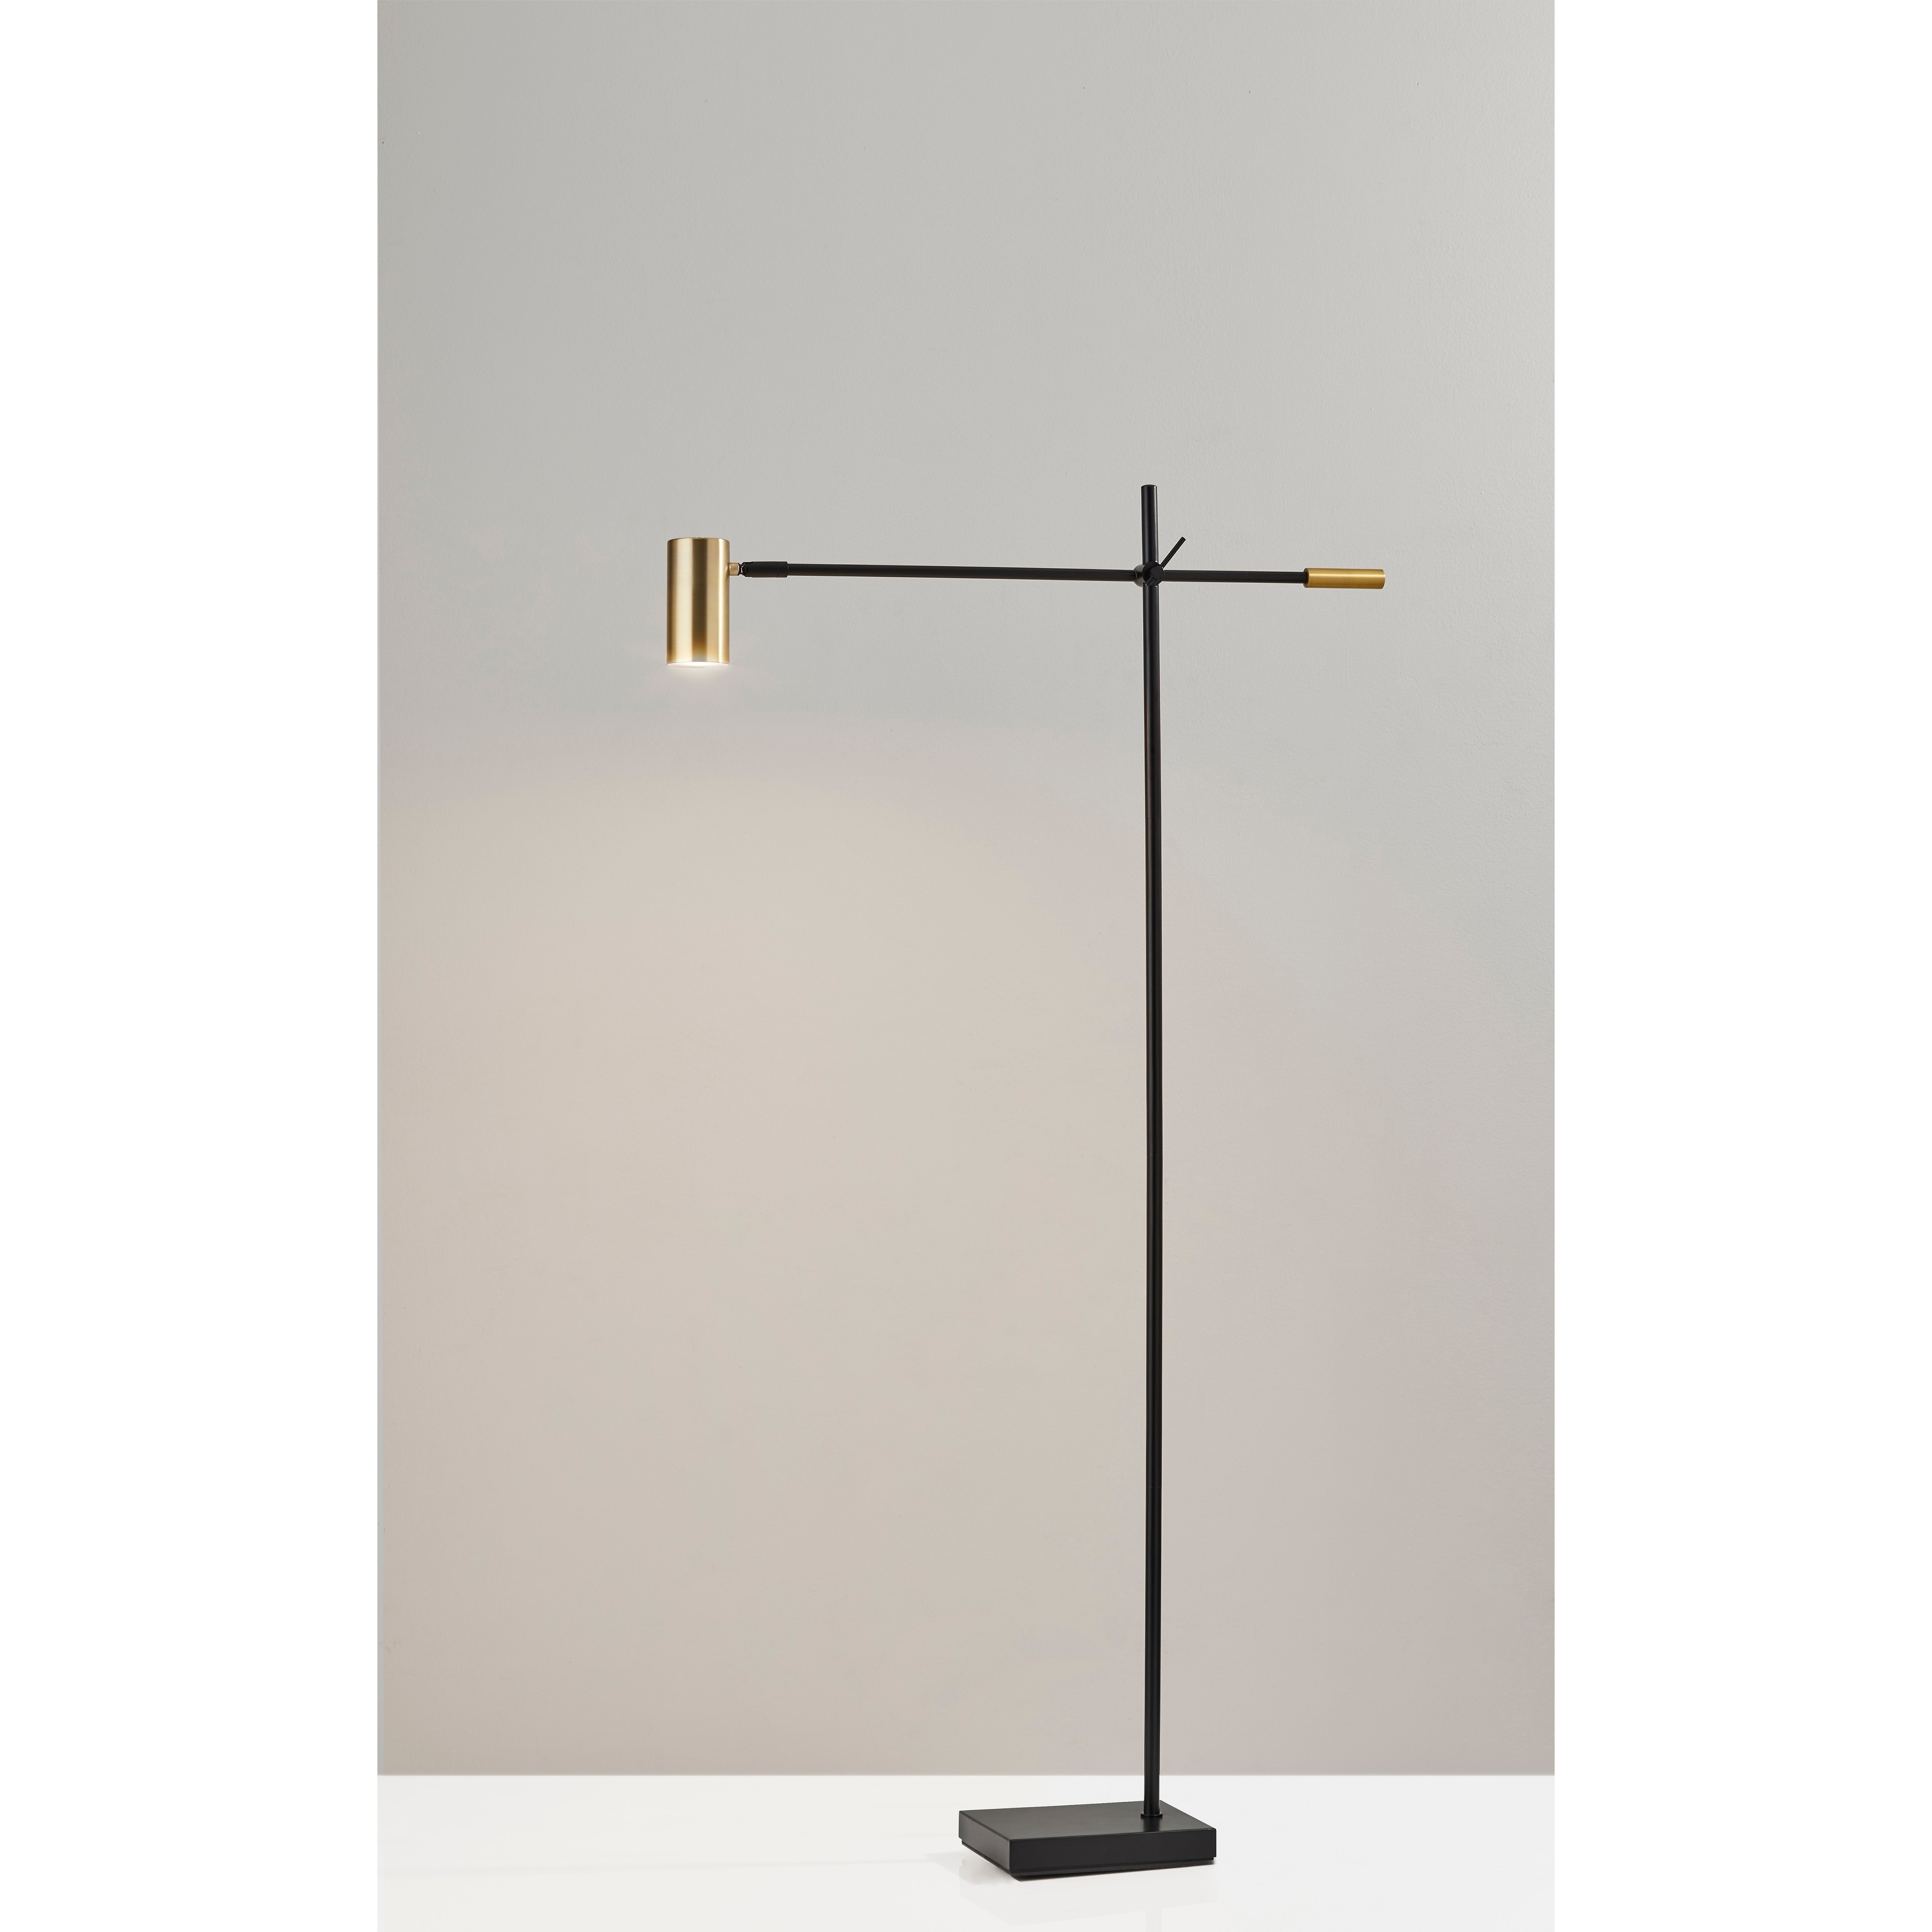 Adesso Collette Adjustable Arm Dimmable LED Floor Lamp On Sale Bed Bath   Beyond 23034046